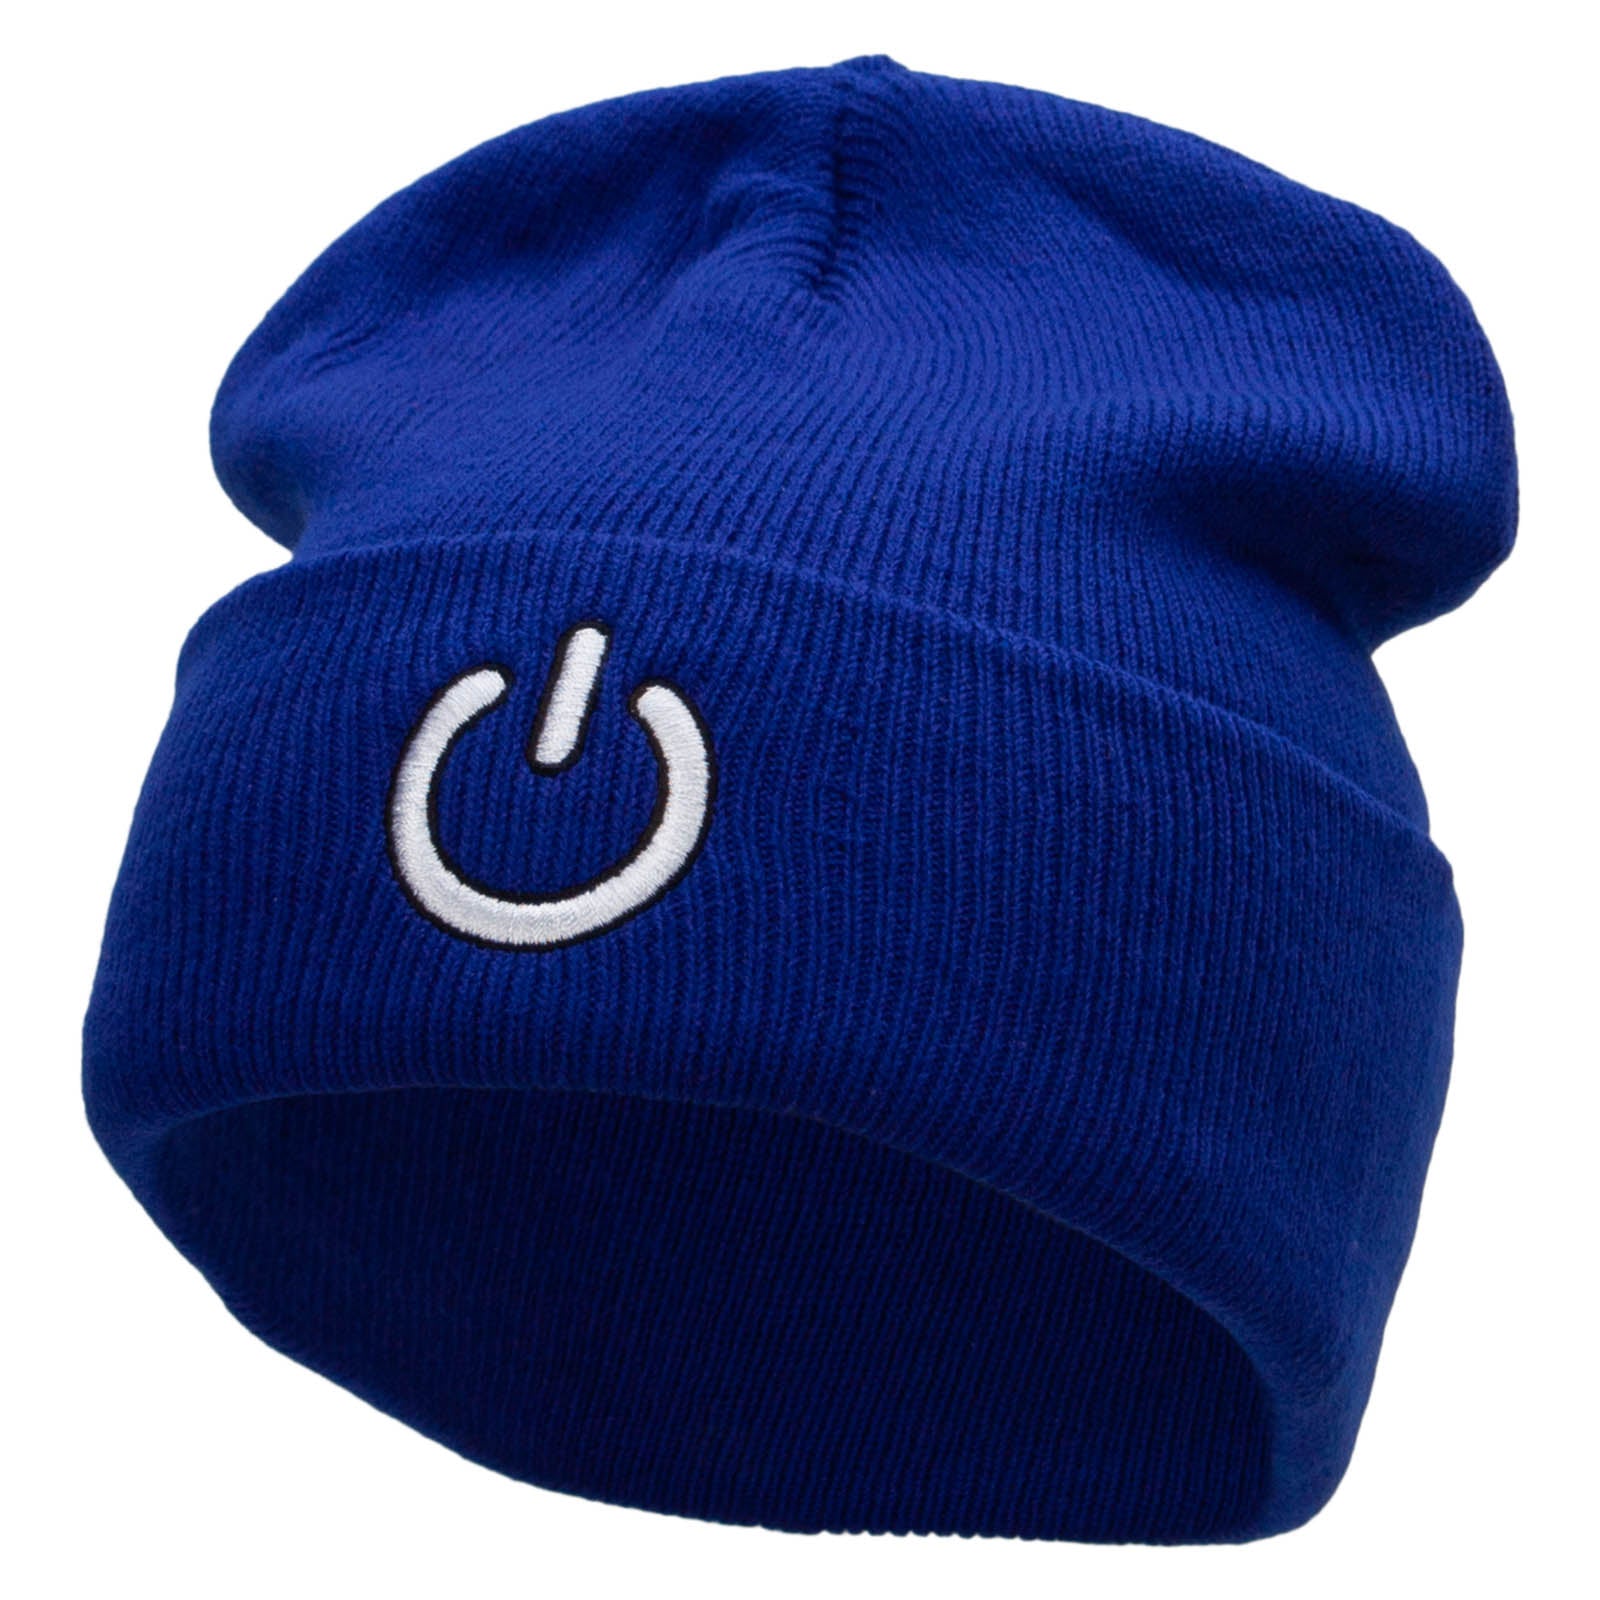 Power Button Embroidered 12 Inch Long Knitted Beanie - Royal OSFM